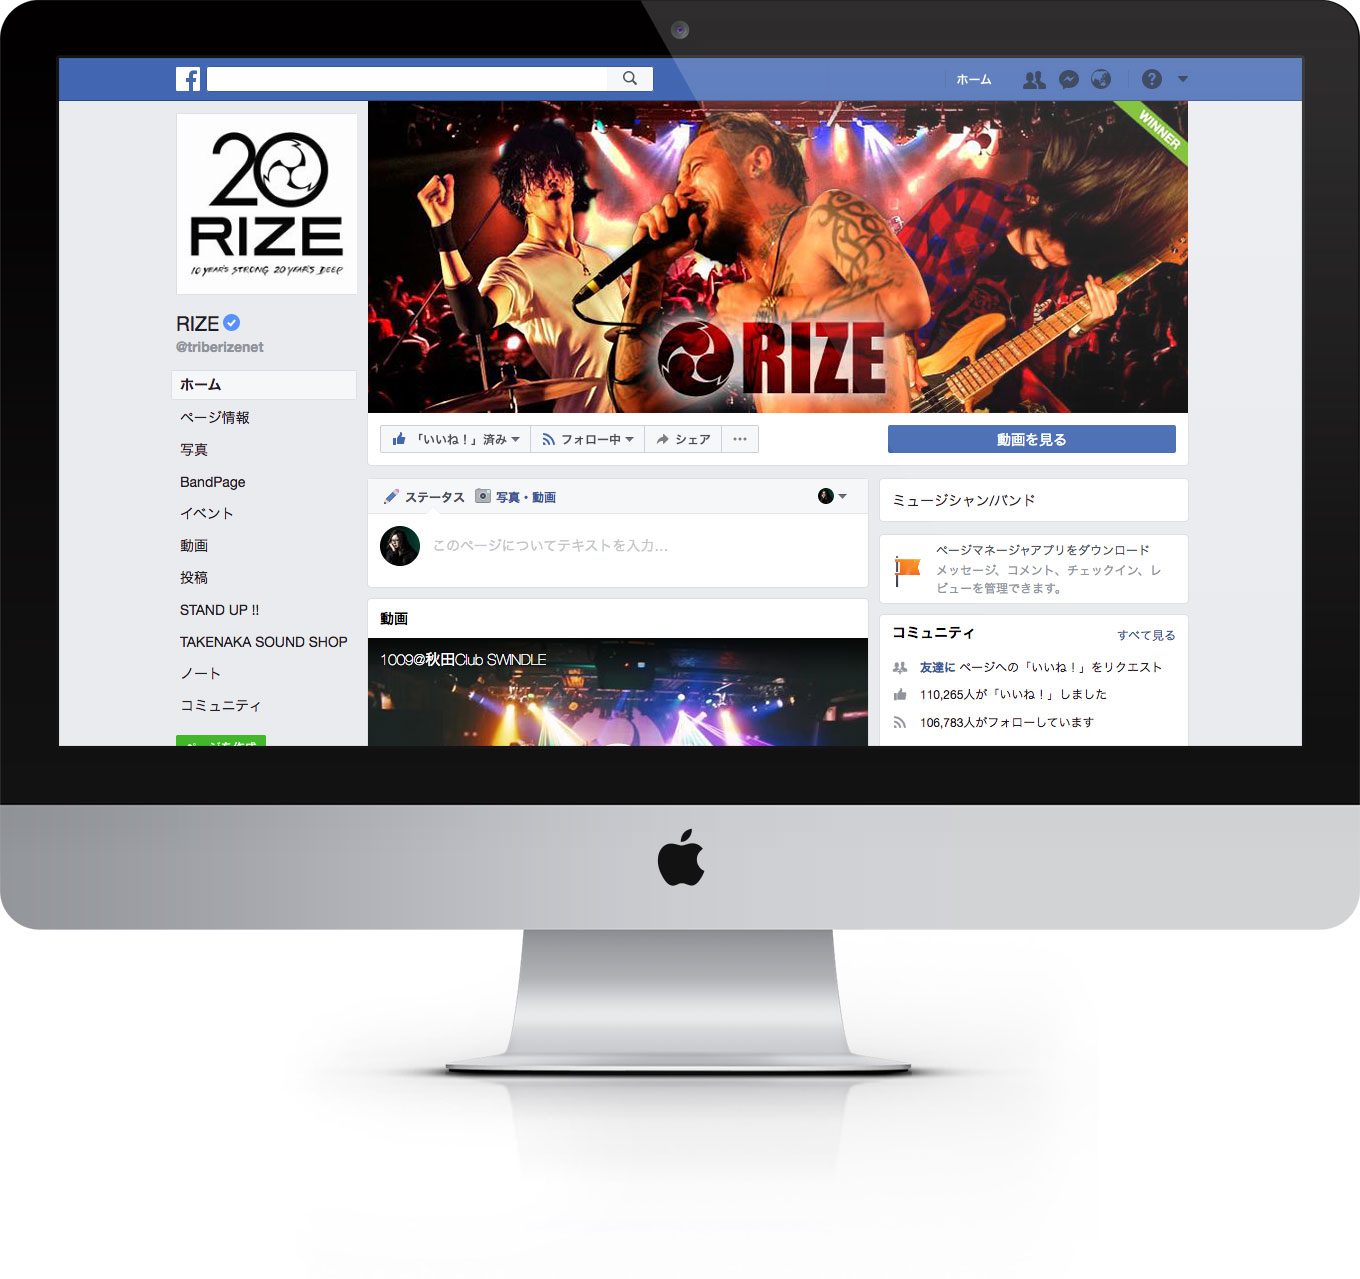 RIZE Official Facebook Pageカバー デザインコンテスト